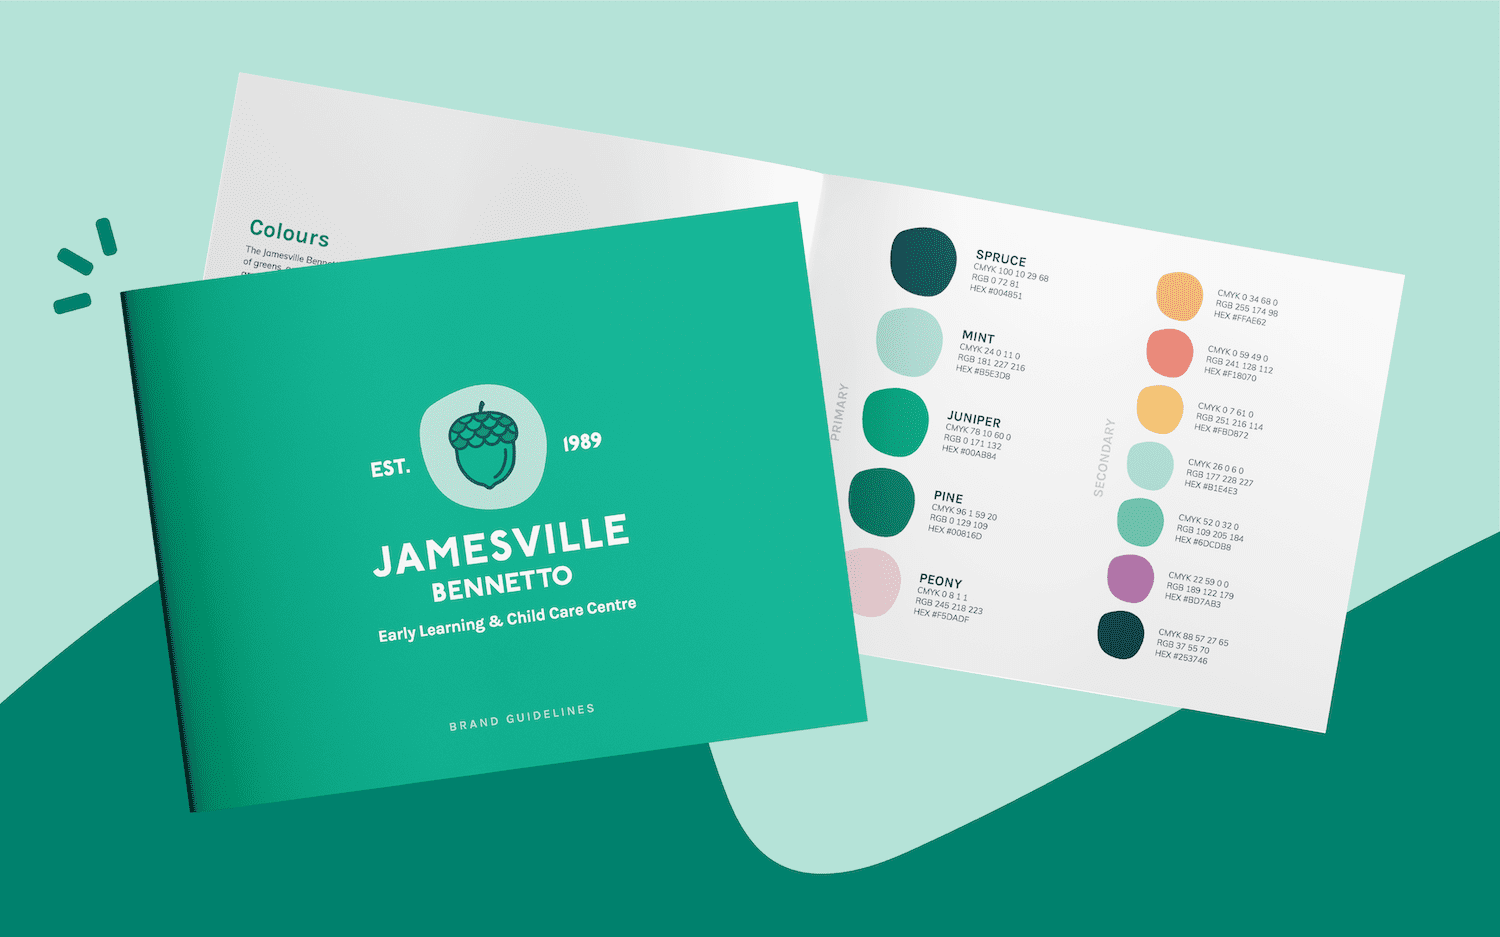 Brand guideline booklet for Jamesville Bennetto Early Learning & Child Care Centre shown on a split dark and light green background